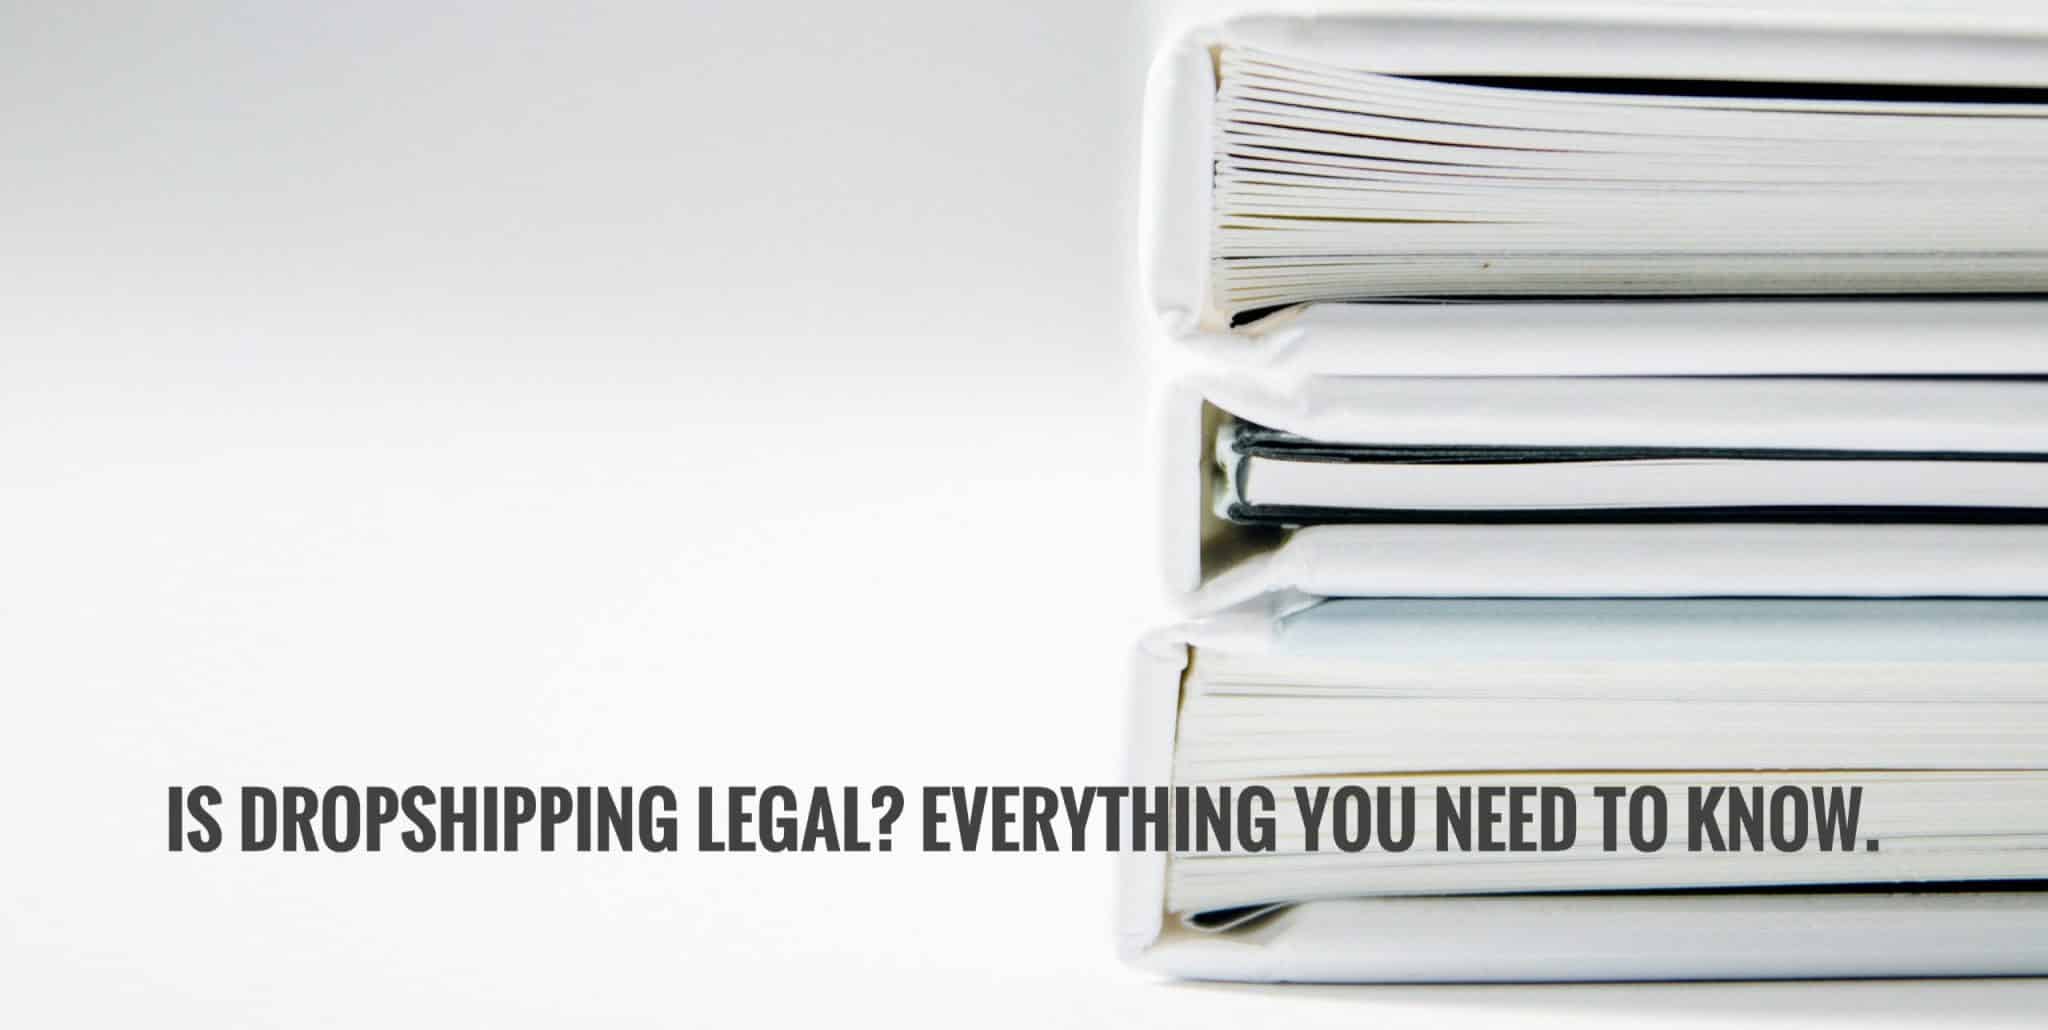 Is Dropshipping Legal? Everything You Need to Know.